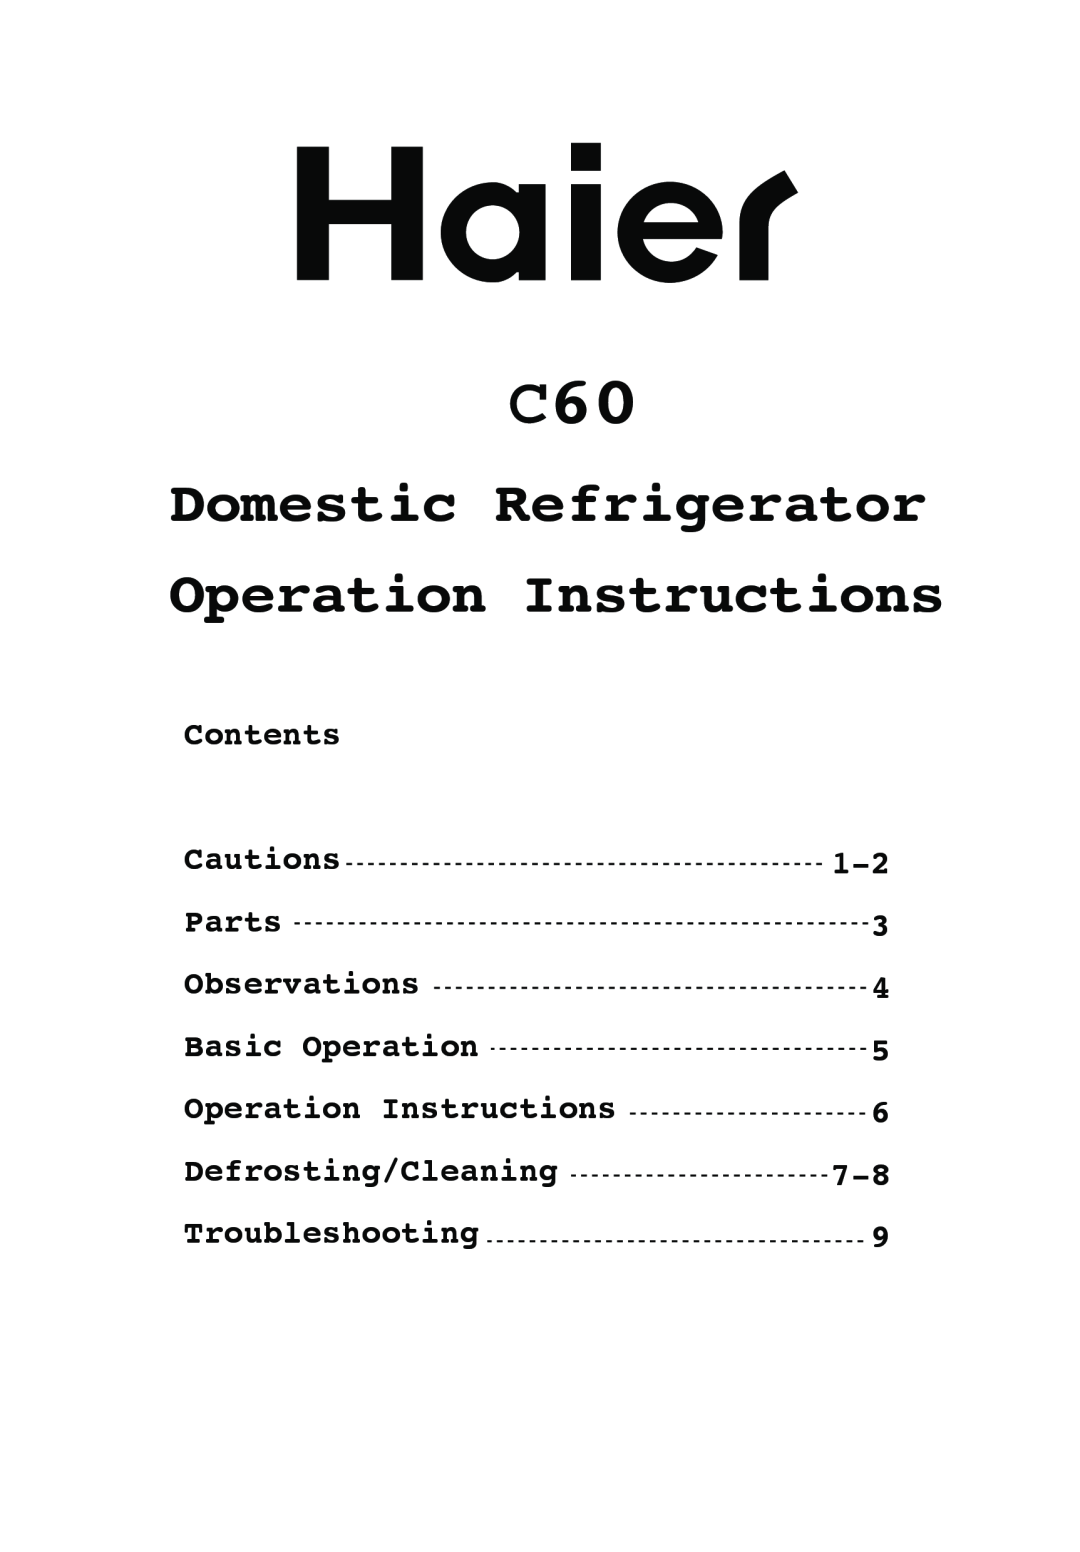 Haier C60 manual Domestic Refrigerator Operation Instructions, Contents Cautions Parts Observations, 1-2 3 4 